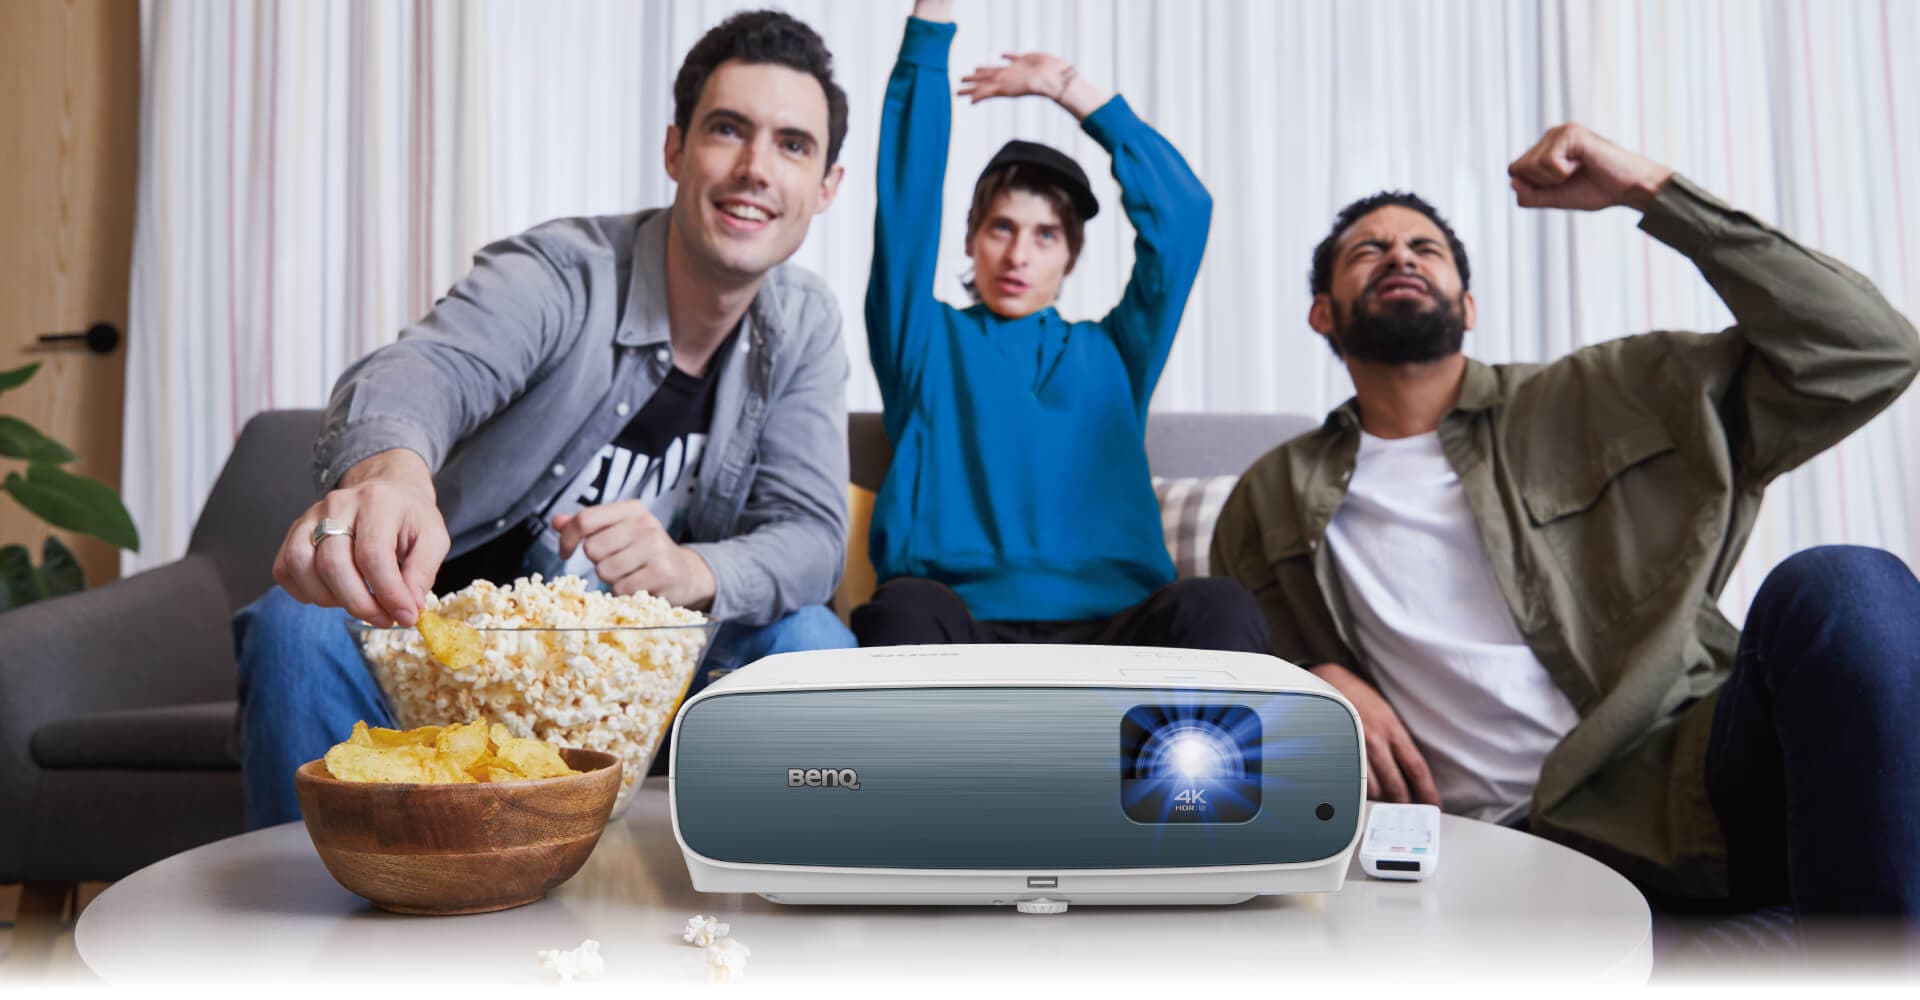 BenQ TK850i 4K home projector enables you to enjoy all authentic HDR scenes with vivid images anywhere even in your bright living room